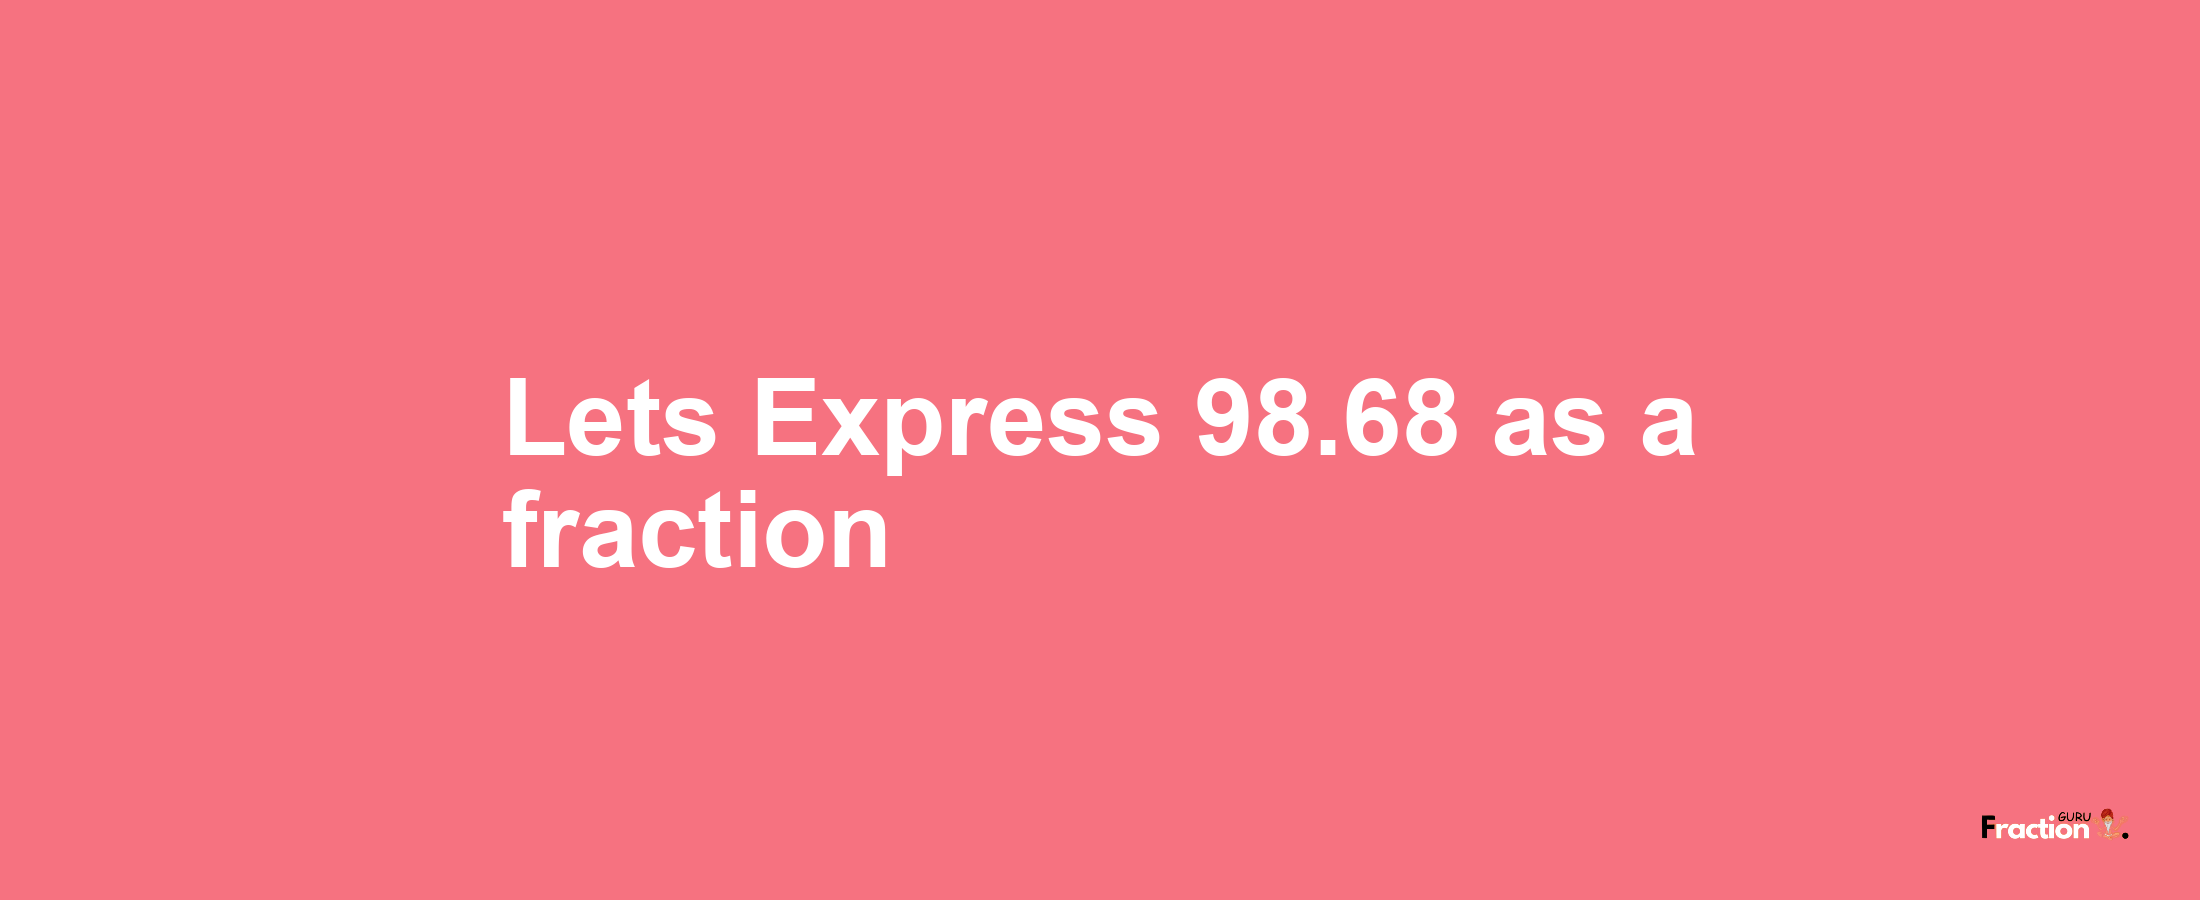 Lets Express 98.68 as afraction